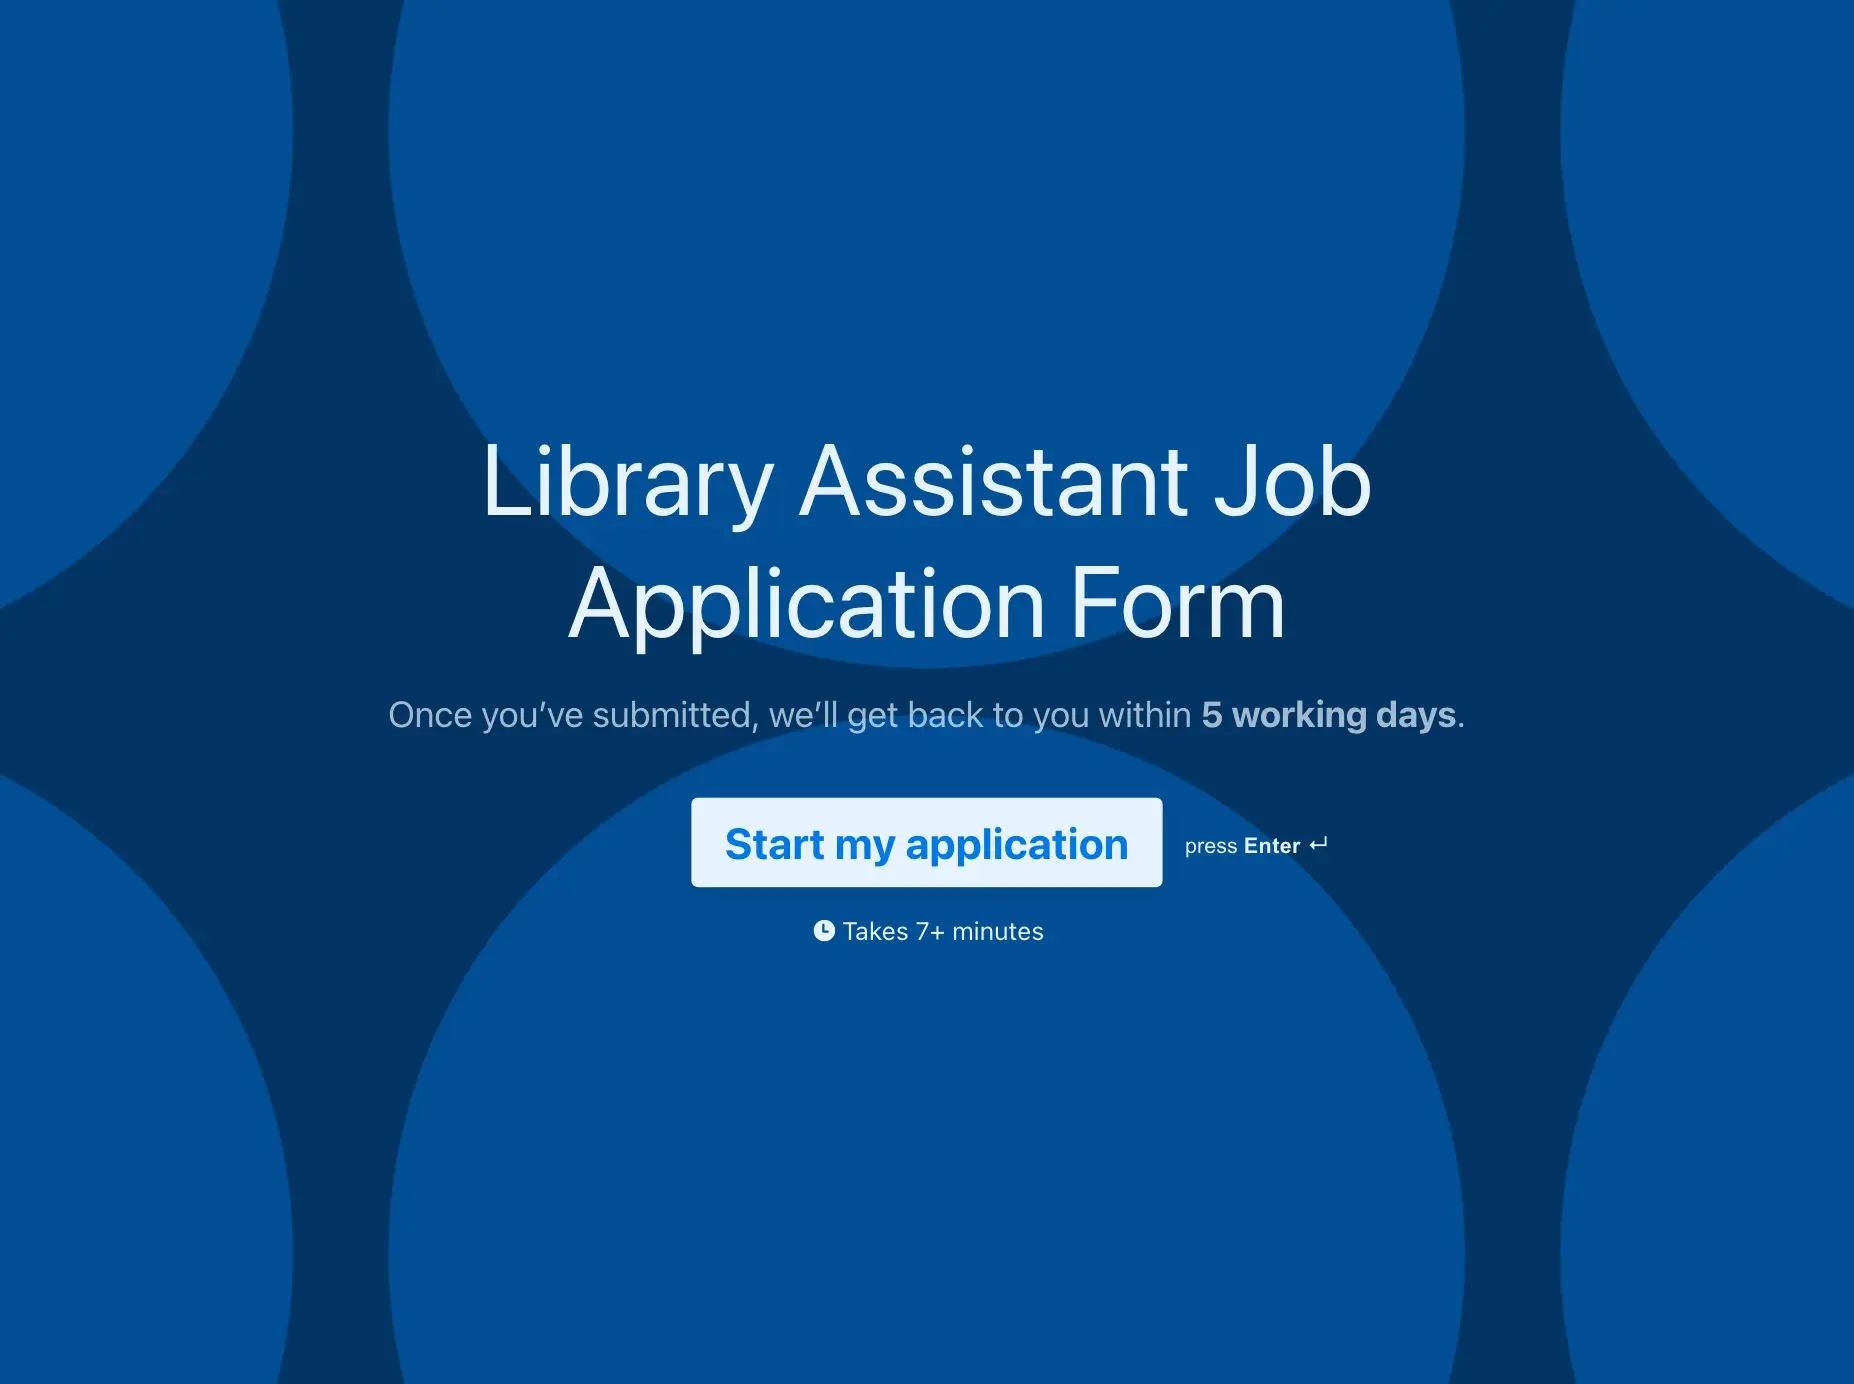 Library assistant job application form template Hero